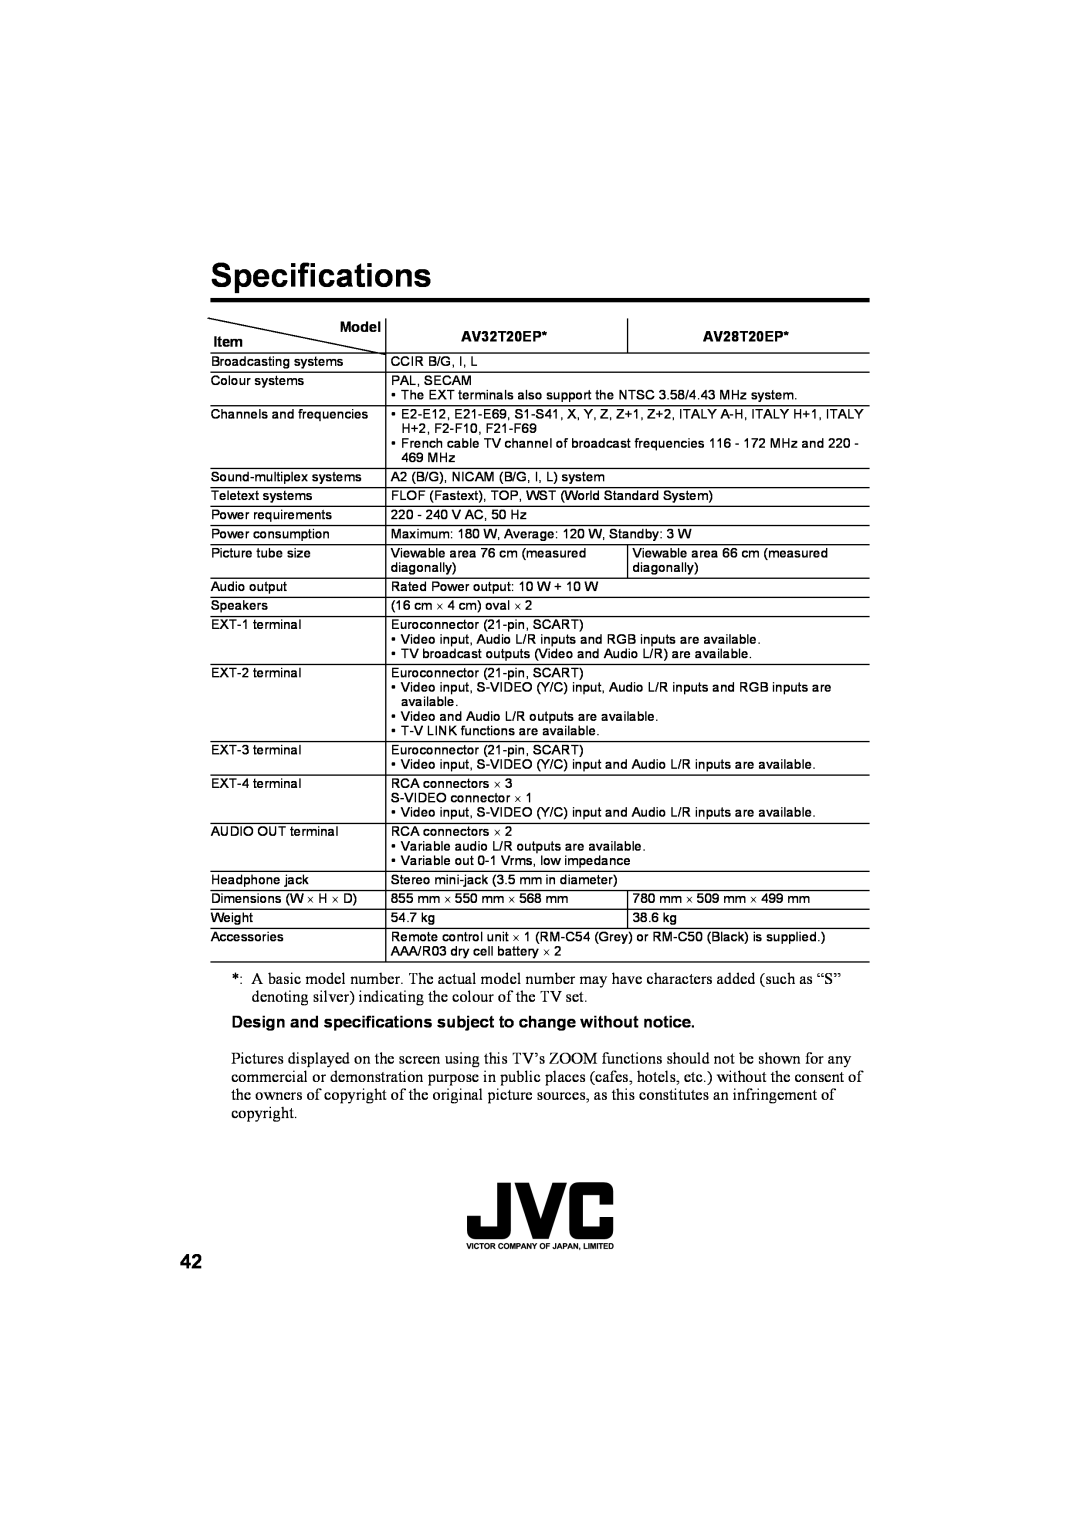 JVC AV28T20EP, AV32T20EP manual Specifications, Design and specifications subject to change without notice 